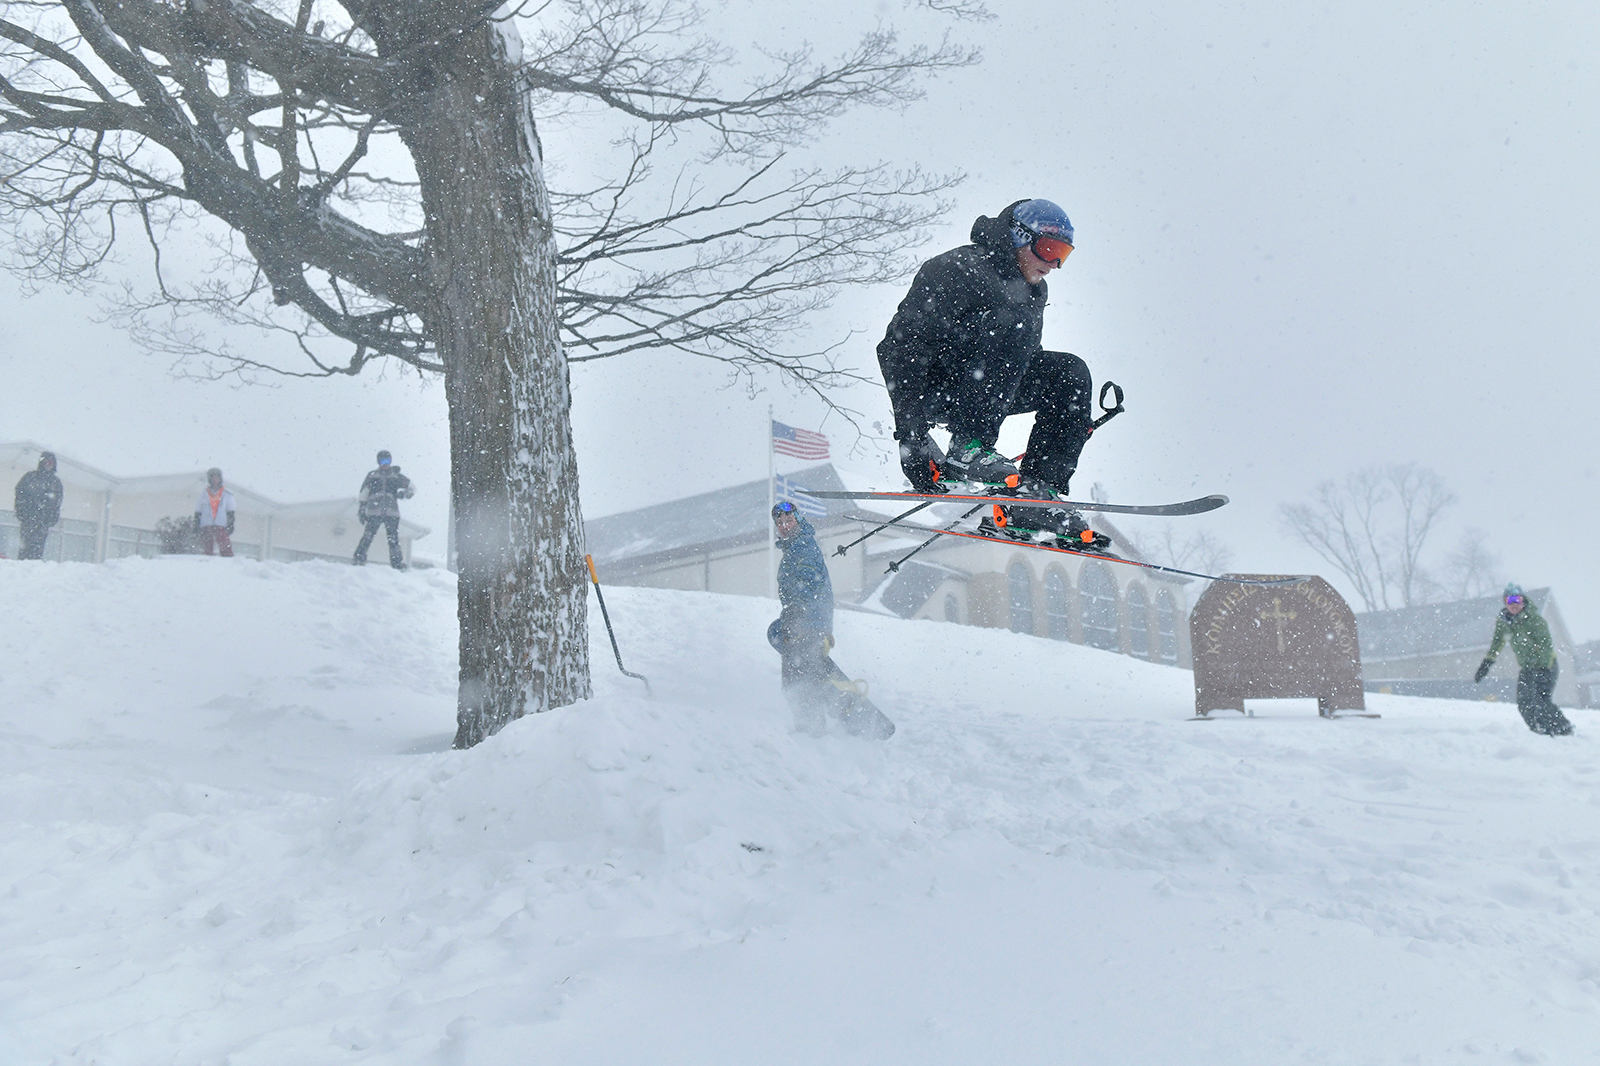 Zack Andersen skis off a jump built on the lawn of Dormition of the Virgin Mary Greek Orthodox Church, on Saturday, January 29, in Somervillle, Mass. 